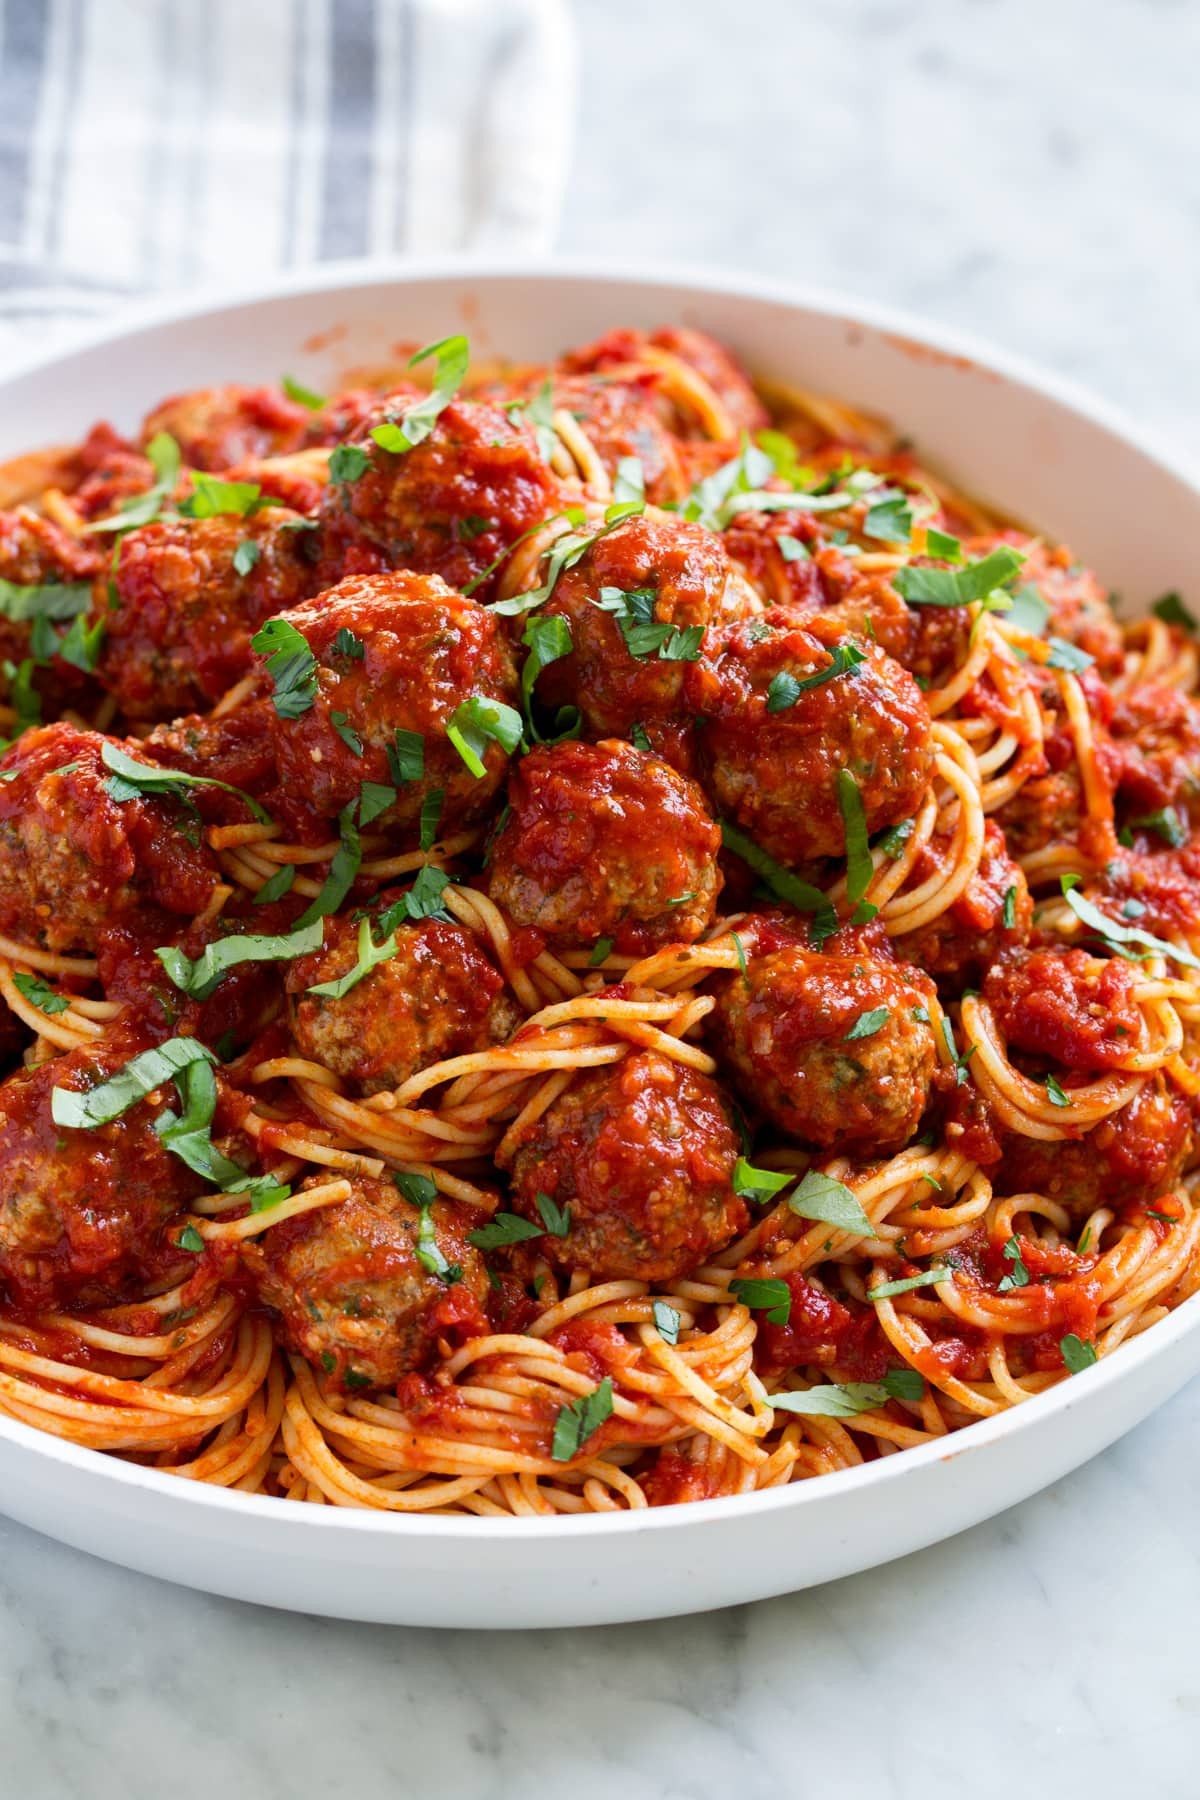 Italian Spaghetti And Meatballs Recipes
 Best Meatball Recipe Baked or Fried Cooking Classy